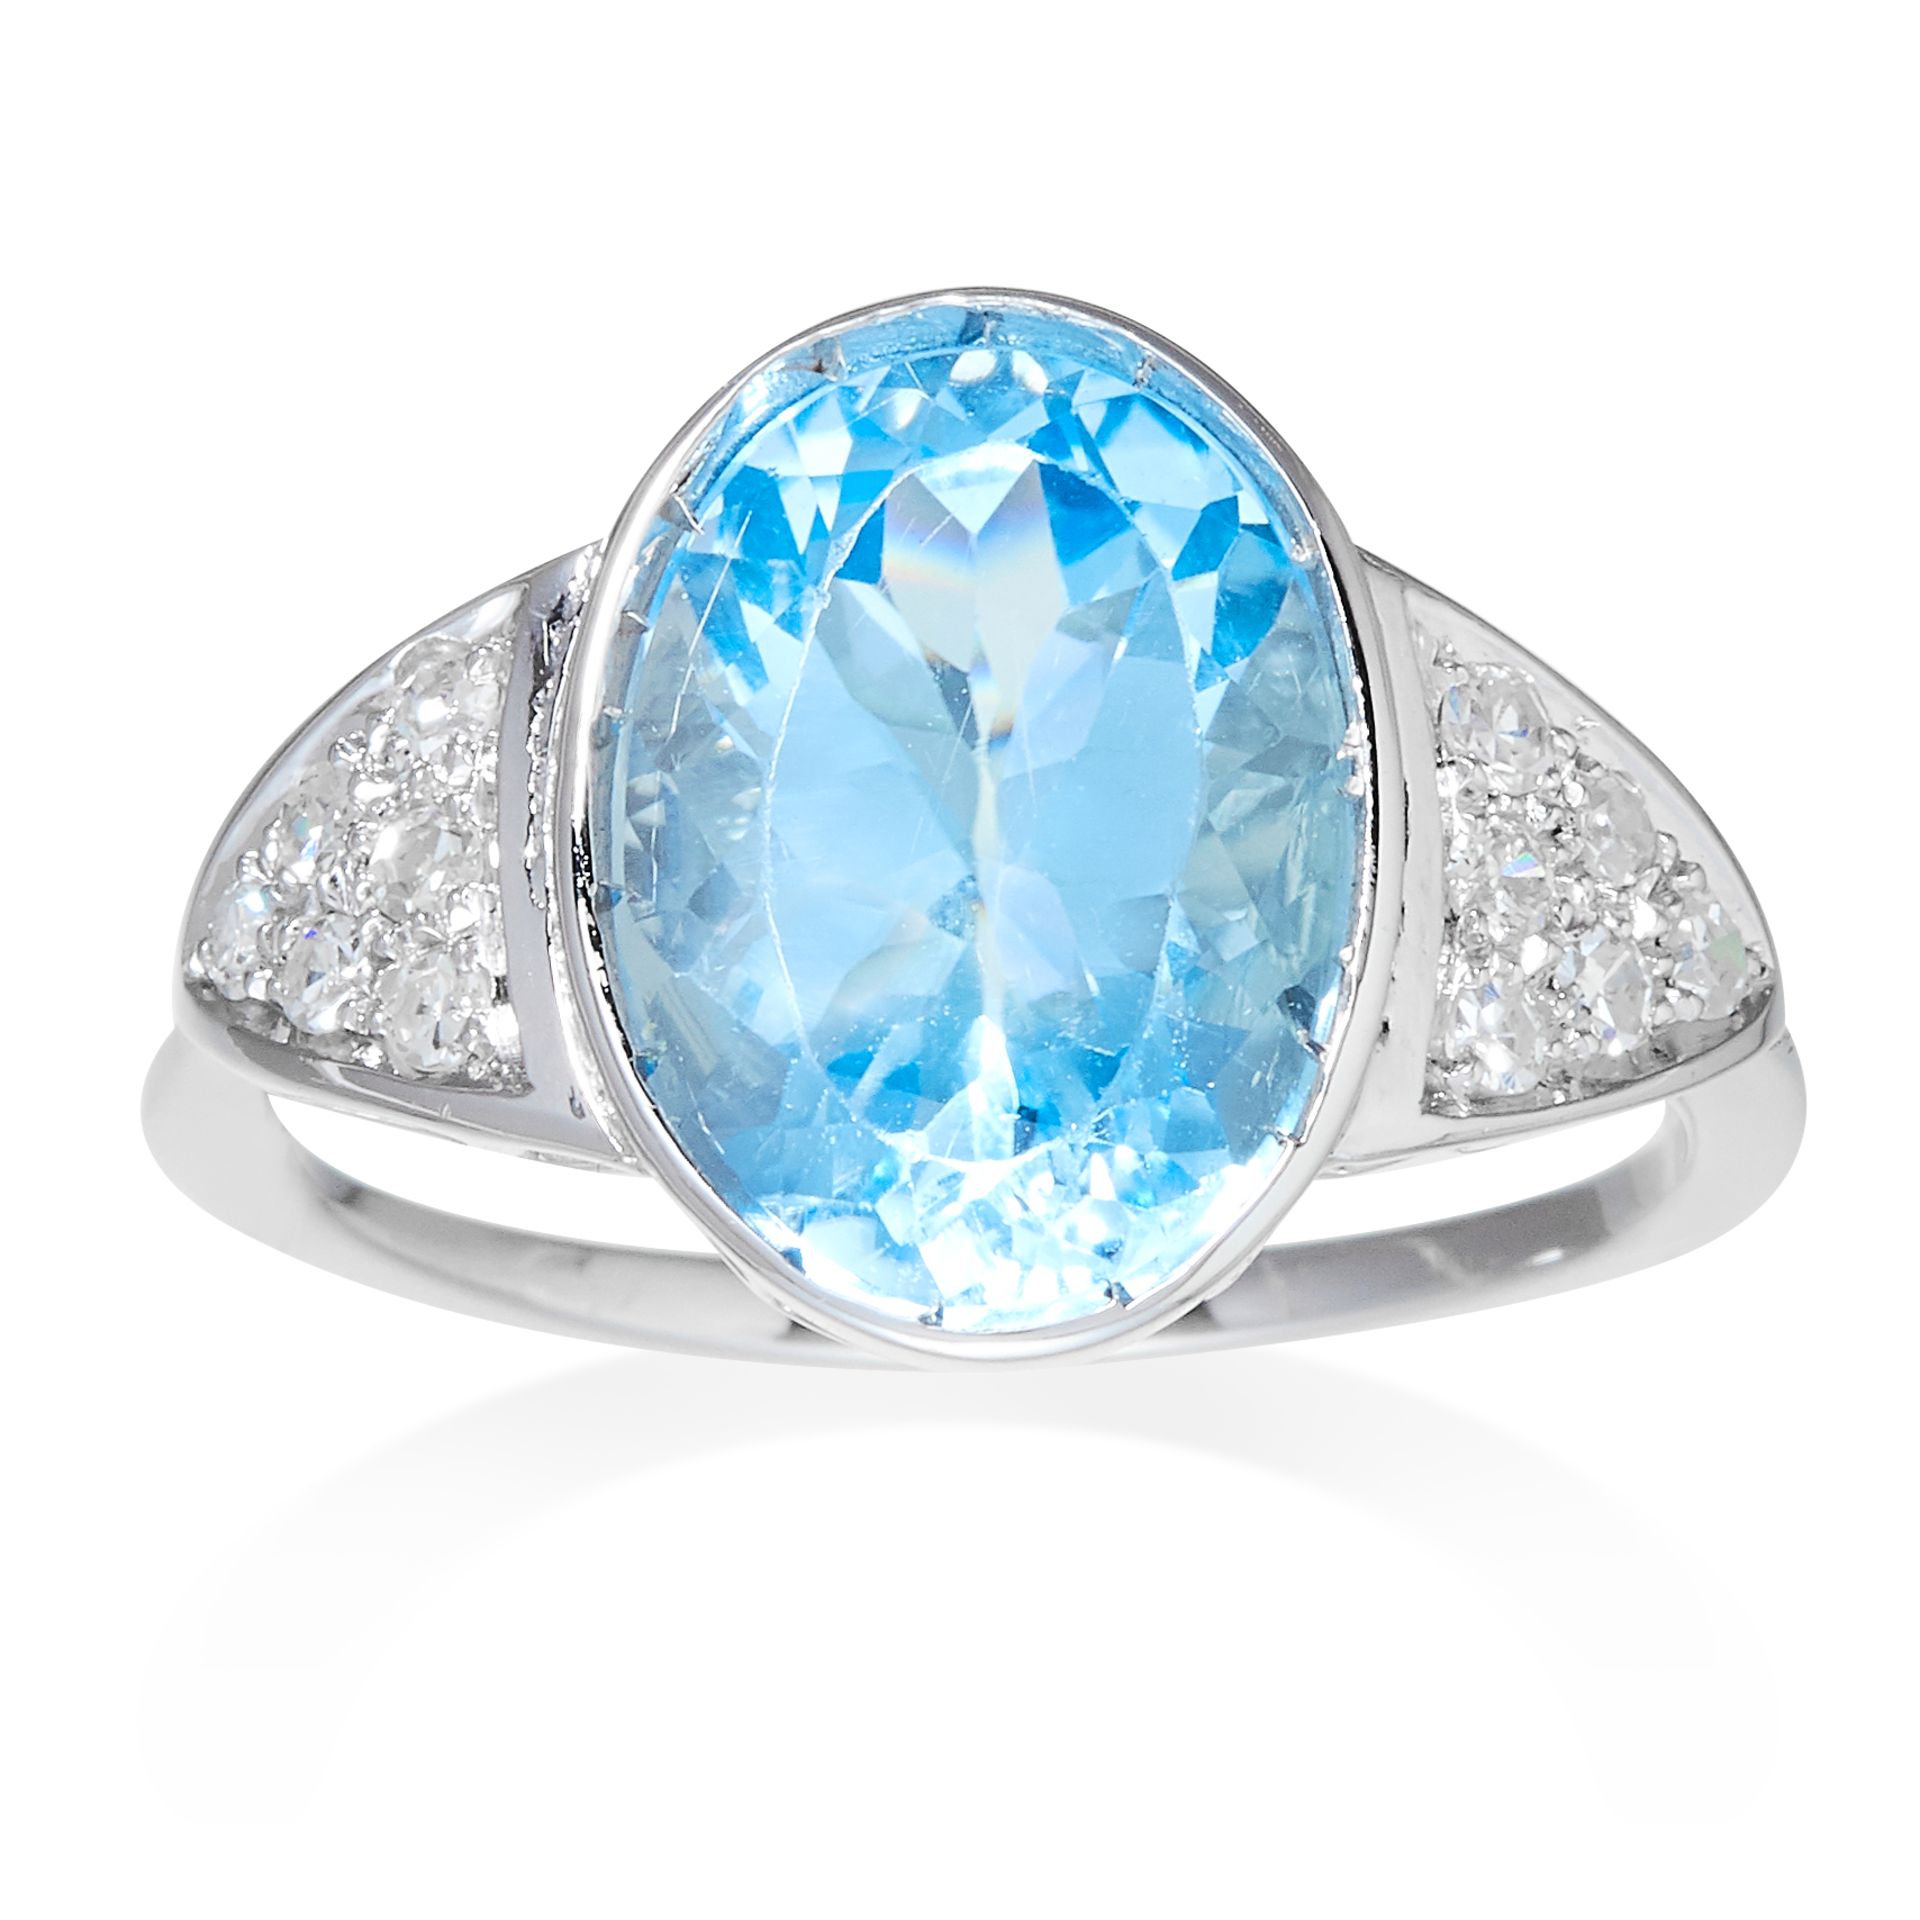 AN AQUAMARINE AND DIAMOND RING in platinum or white gold, the oval cut aquamarine of 6.09 carats